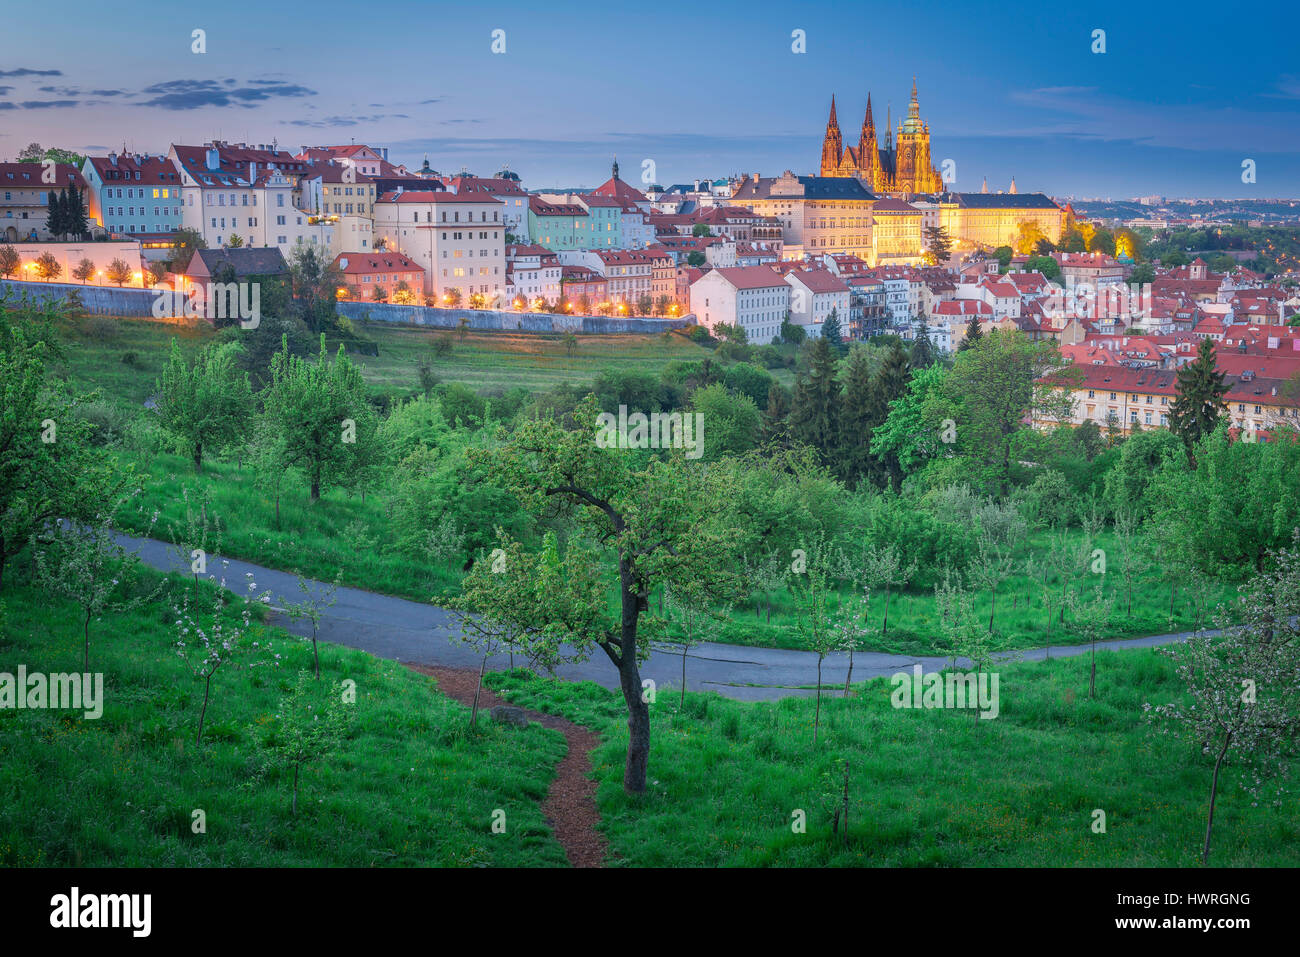 Prague Petrin Hill cityscape, view of the Hradcany district at dusk from the top of Petrin Hill, Prague, Czech Republic, Europe. Stock Photo